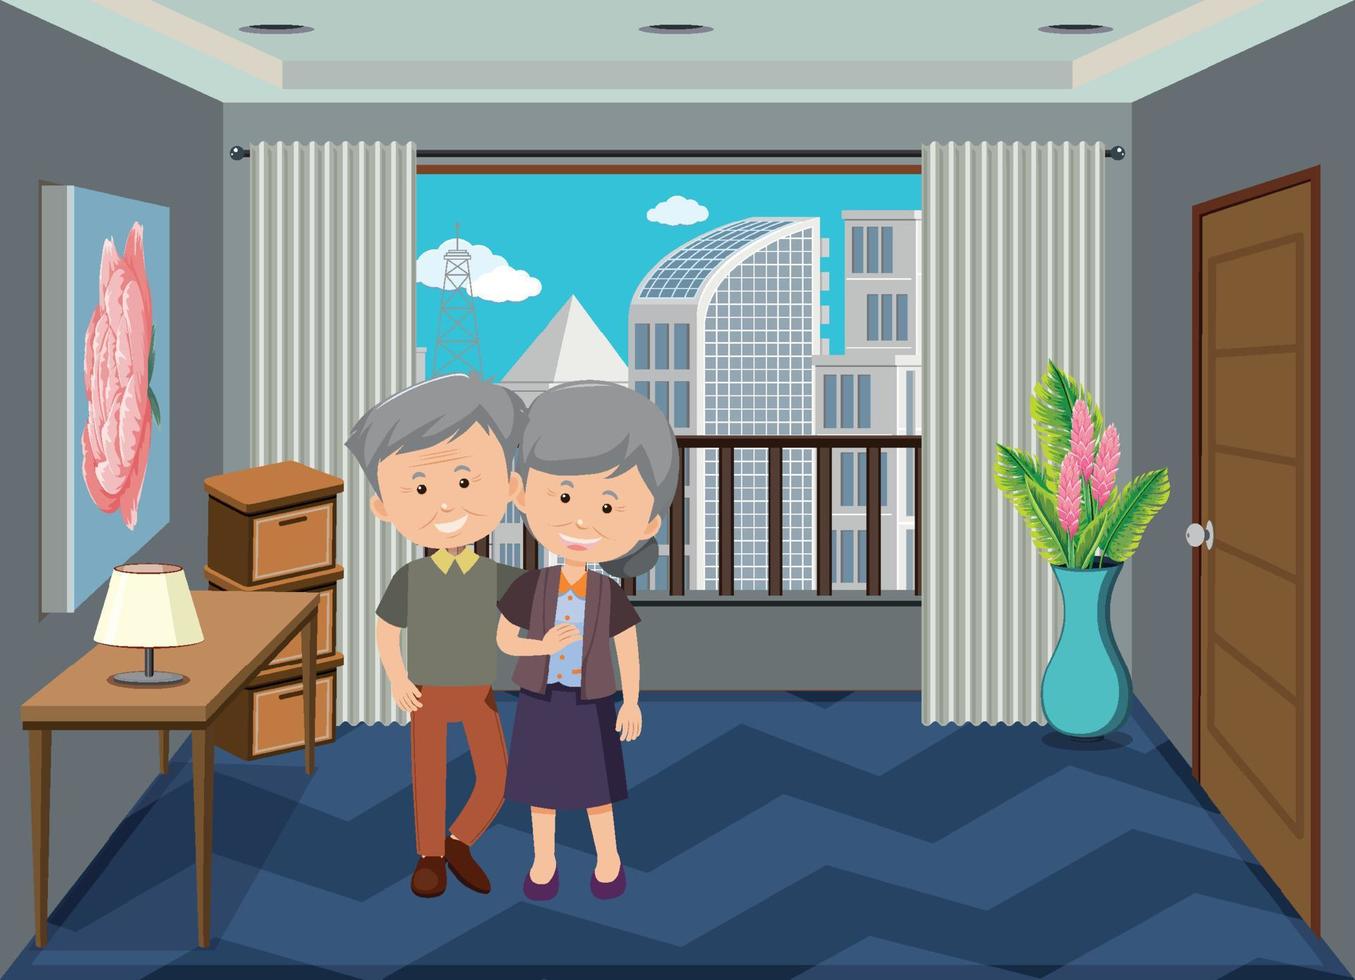 Living room scene with family members in cartoon style vector